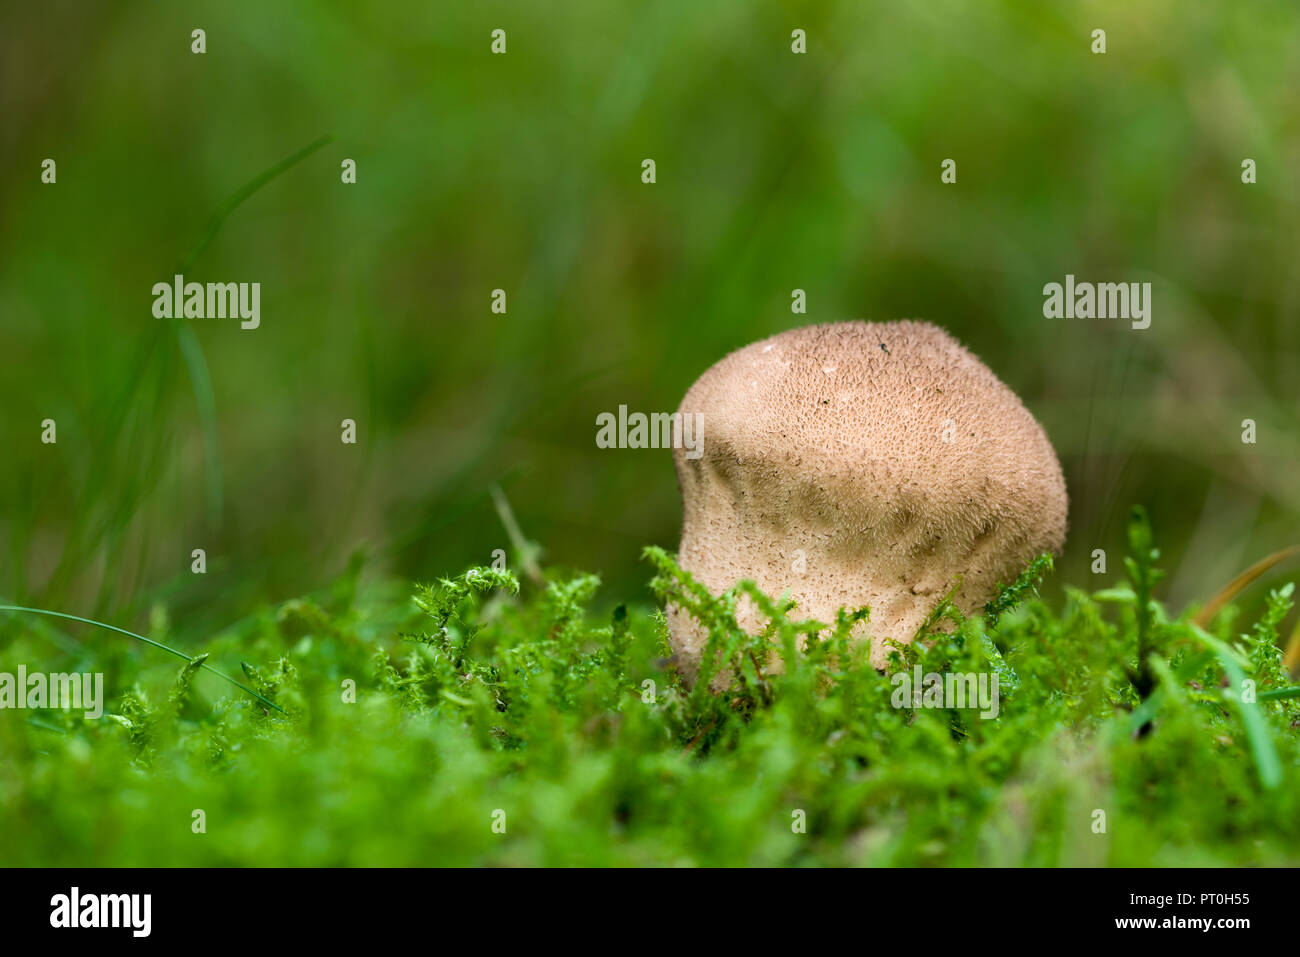 Soft Puffball (Lycoperdon molle), also known as Smooth Puffball, mushroom growing in Stockhill Wood, Somerset, England. Stock Photo